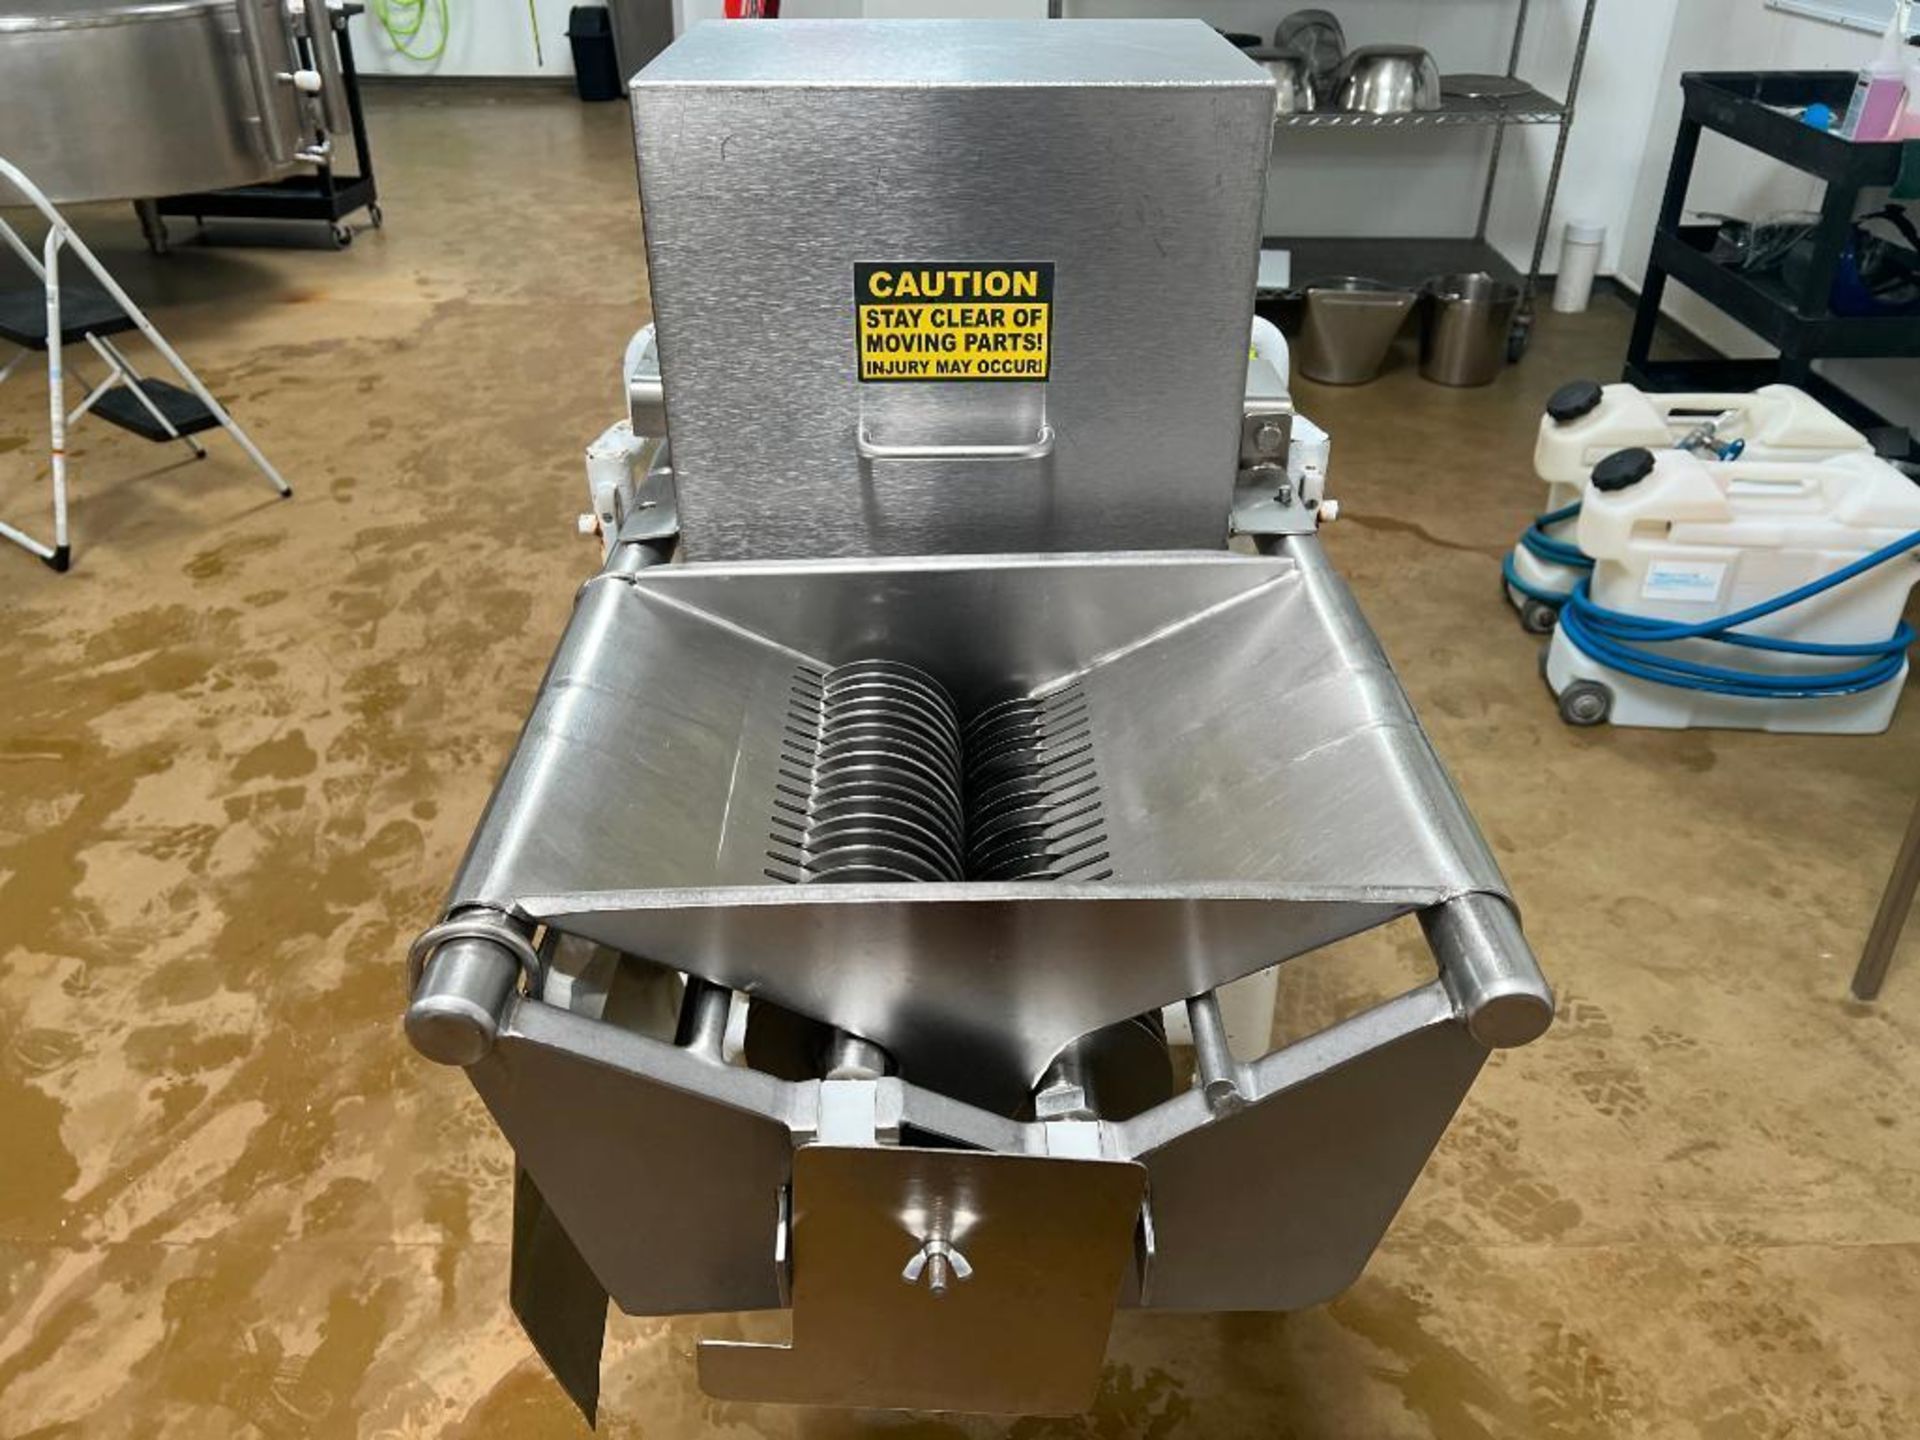 S/S Pneumatic, Mobile Cheese Dicer/Slicer - Rigging Fee: $50